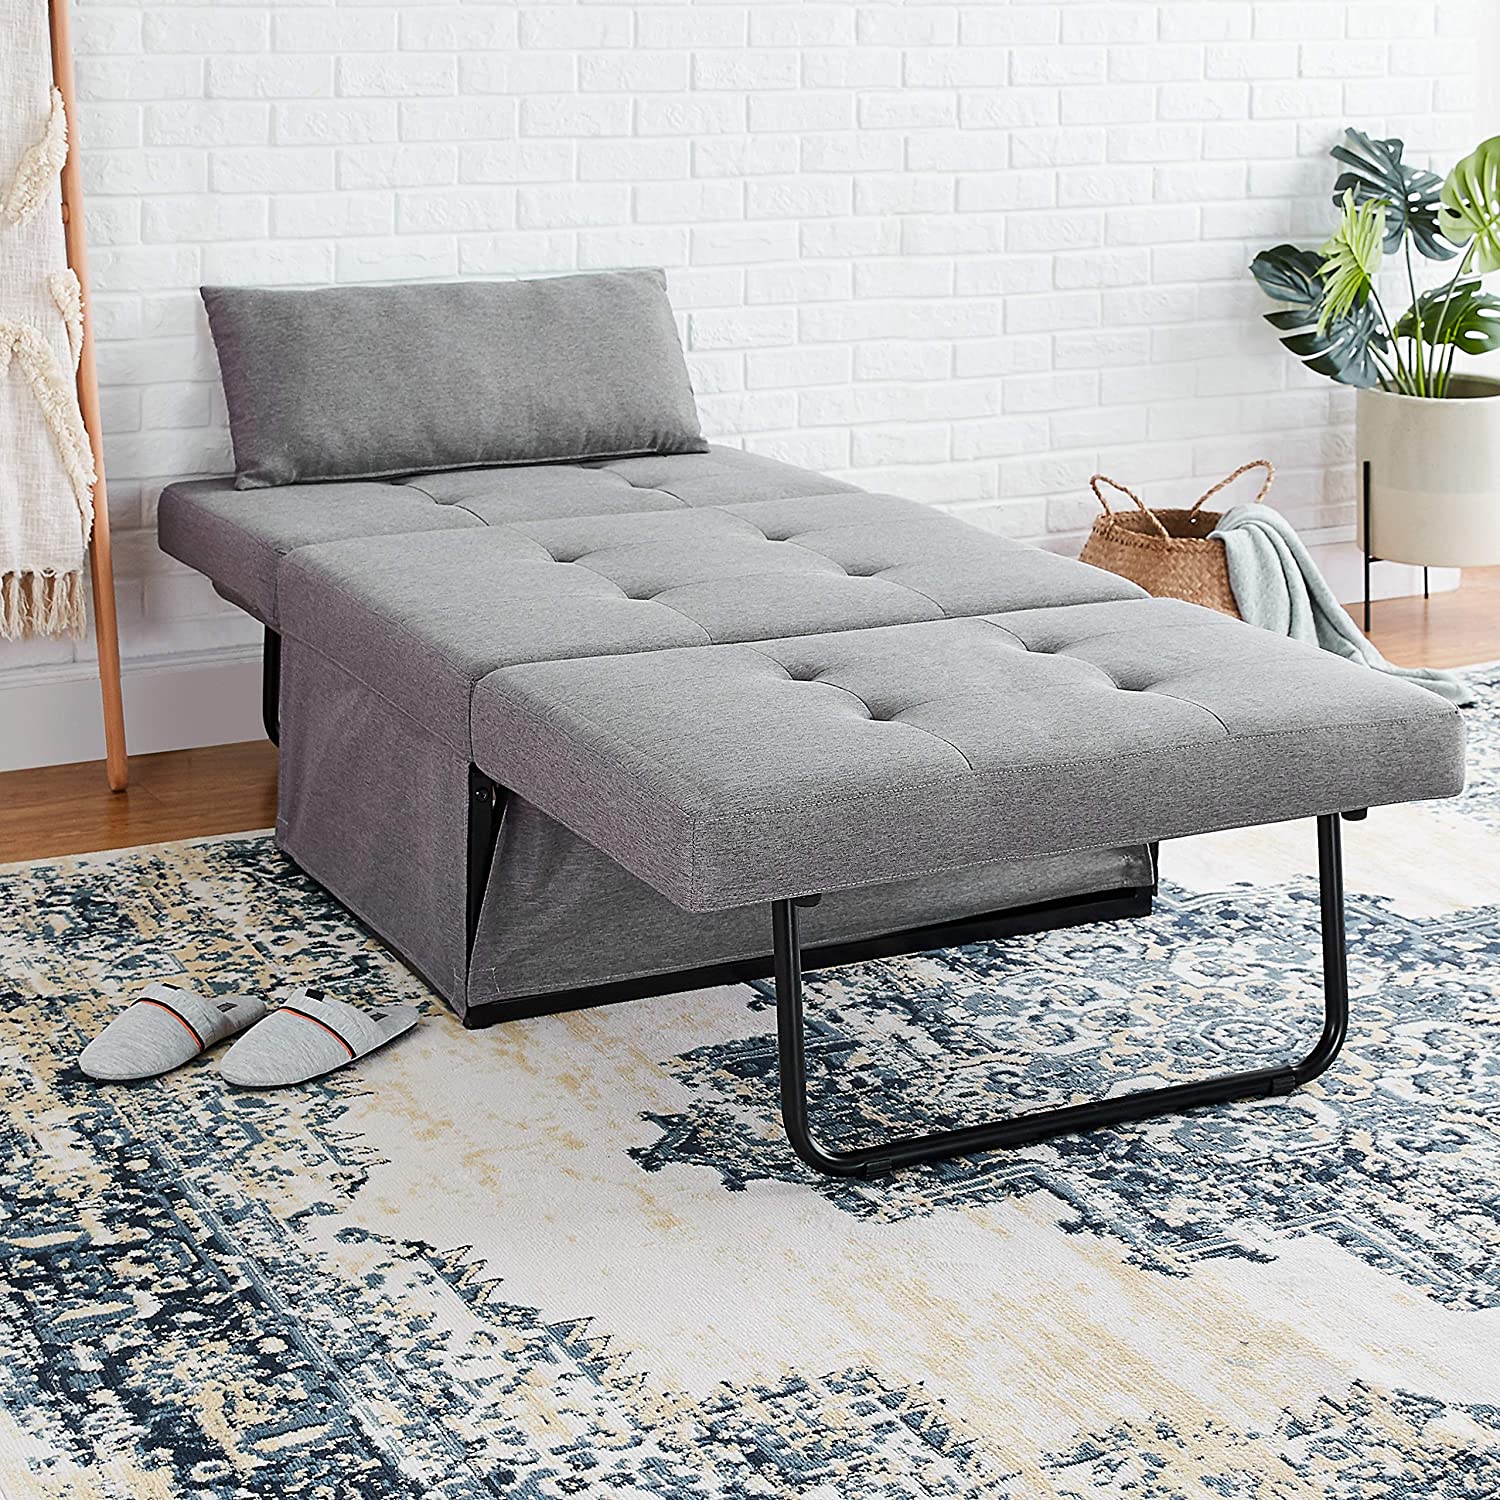 Twin Sleeper Chair Ideas, Twin Bed Fold Out Ottoman